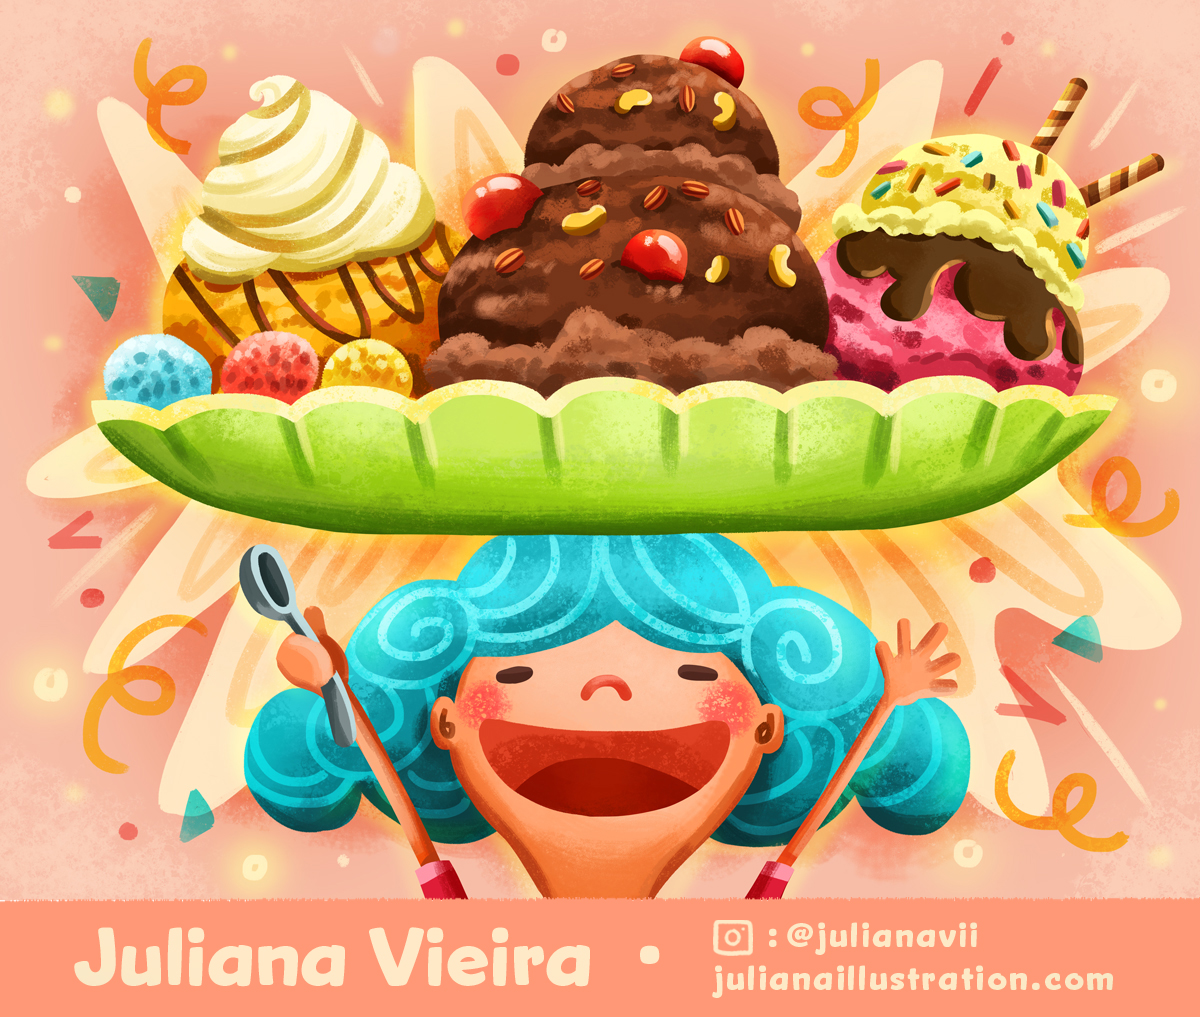 Hello #KidLitArtPostcard !😊🍦 My name is Juliana Vieira. I am an illustrator and designer from Canada, and I would love to work on book and editorial projects. Portfolio: julianaillustration.com #kidlit #kidlitart #illustration #summer #icecream